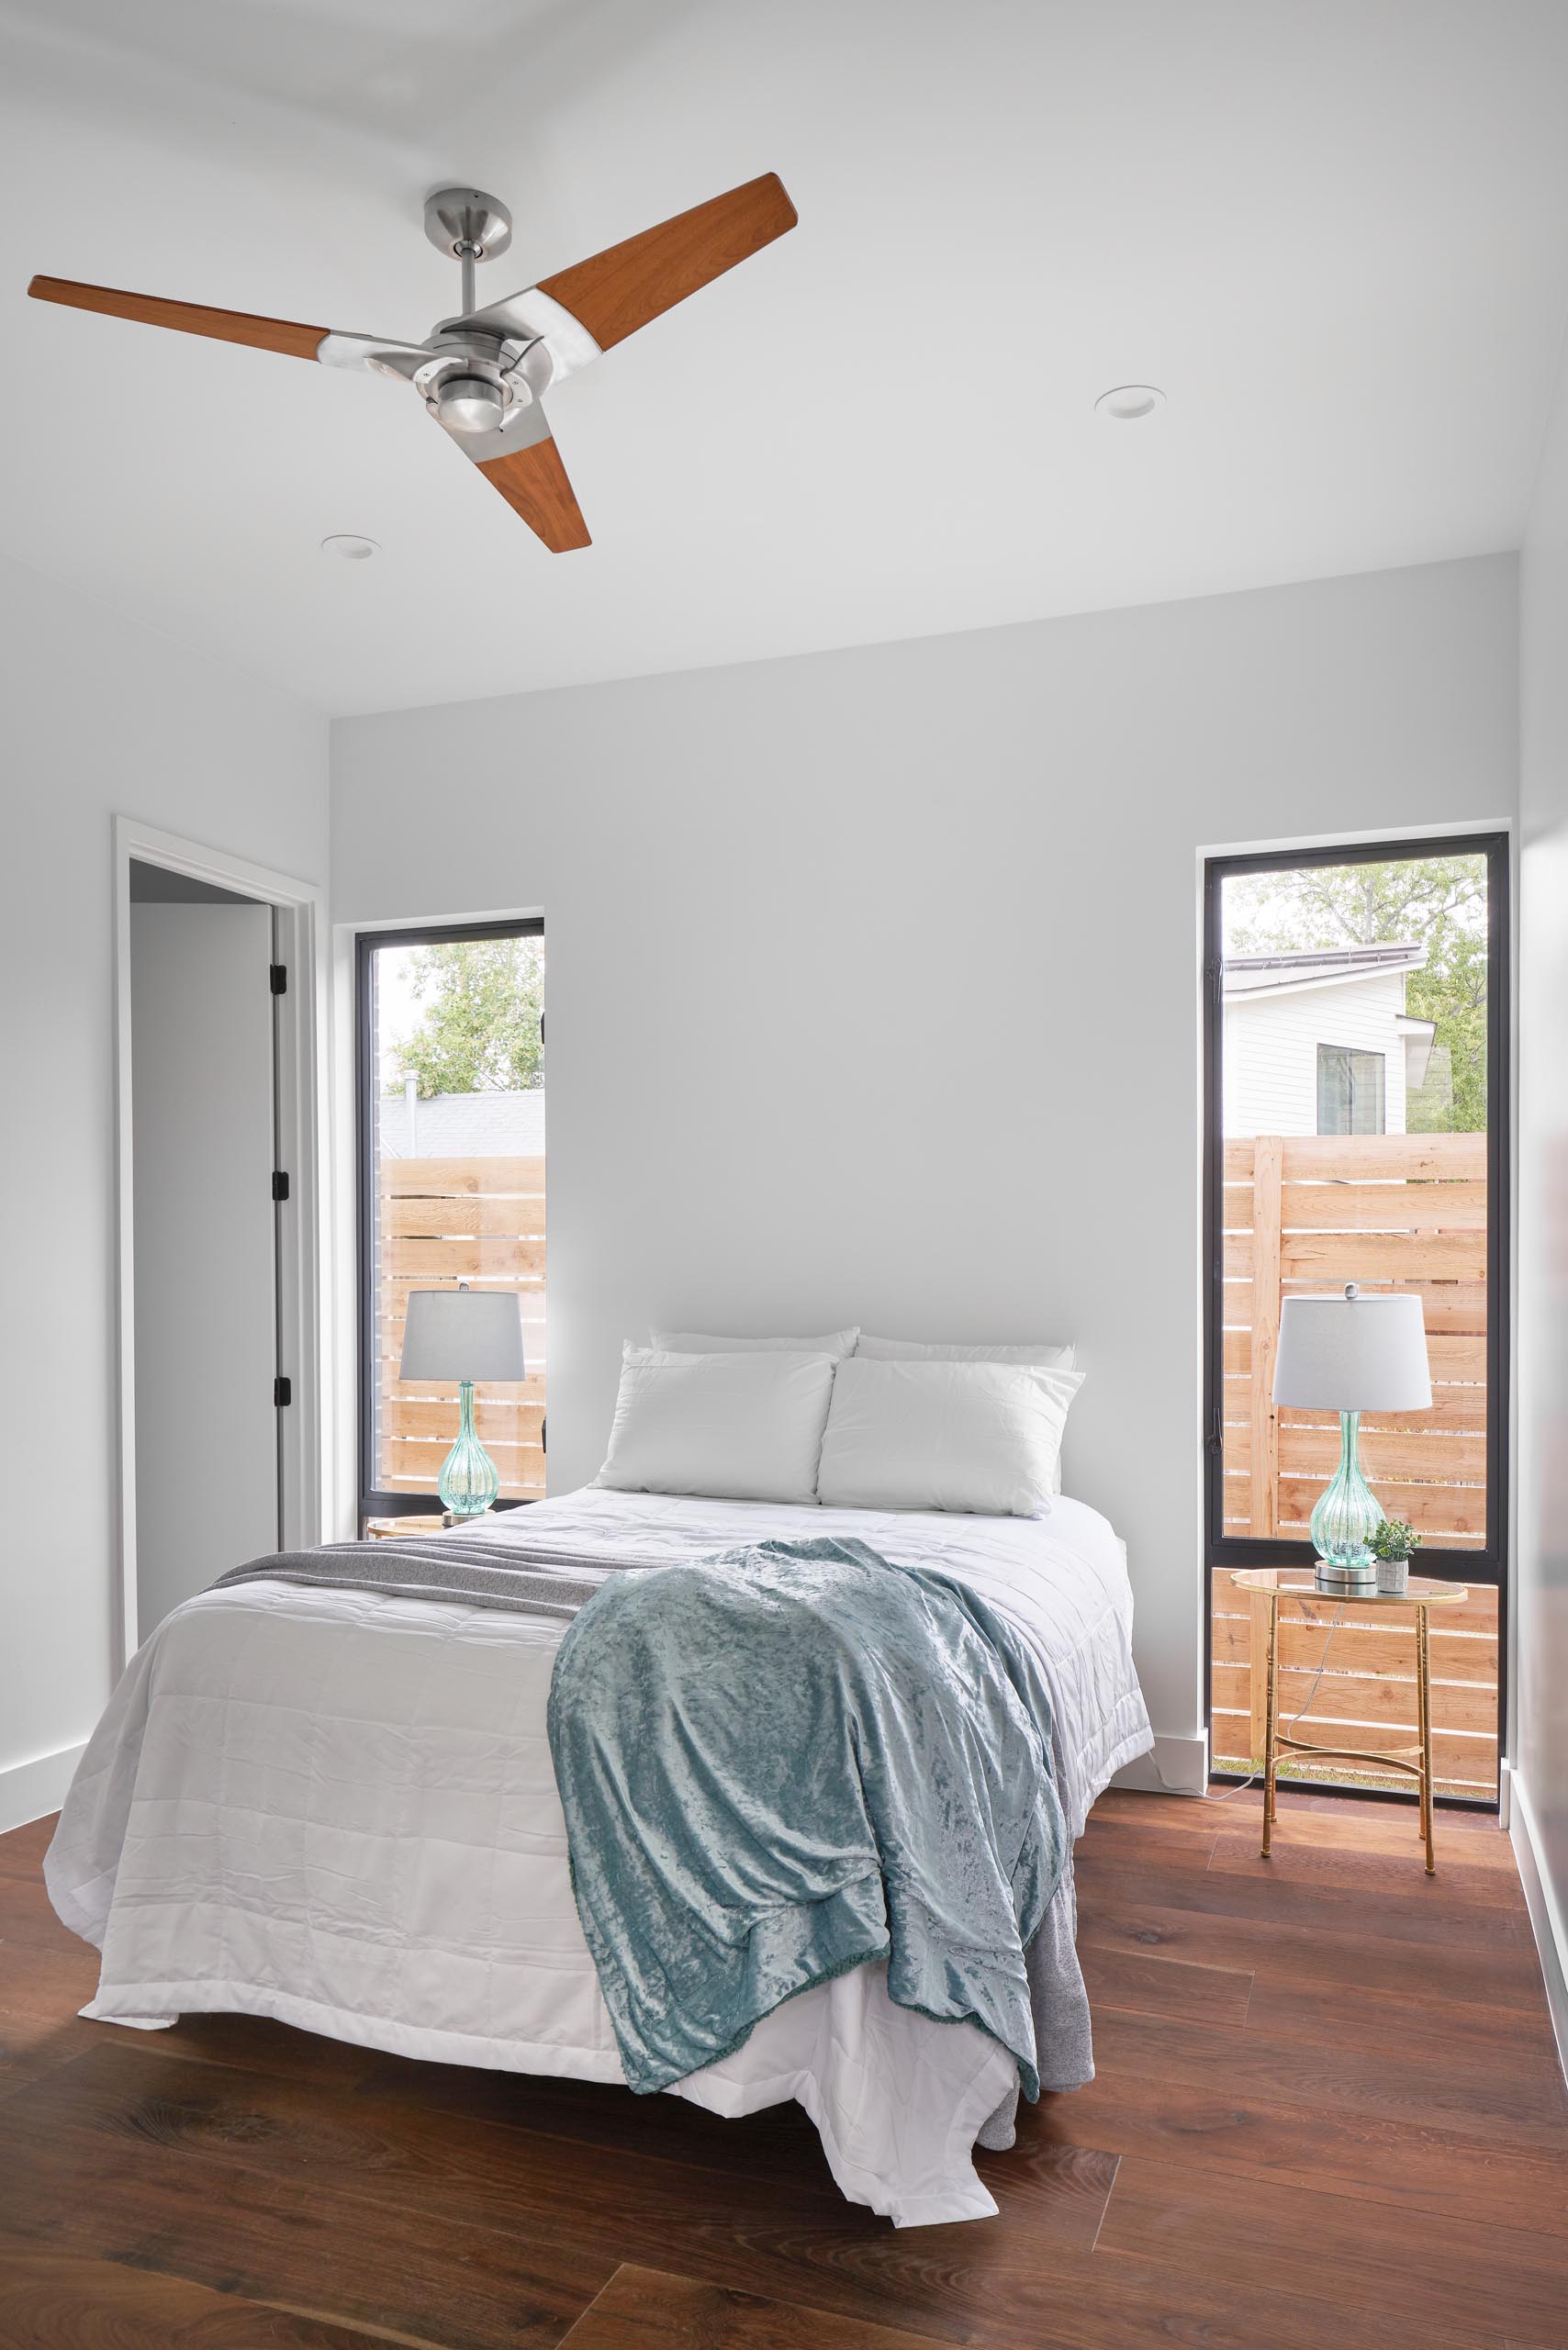 A simple guest bedroom idea, with side tables positioned in front of tall windows.